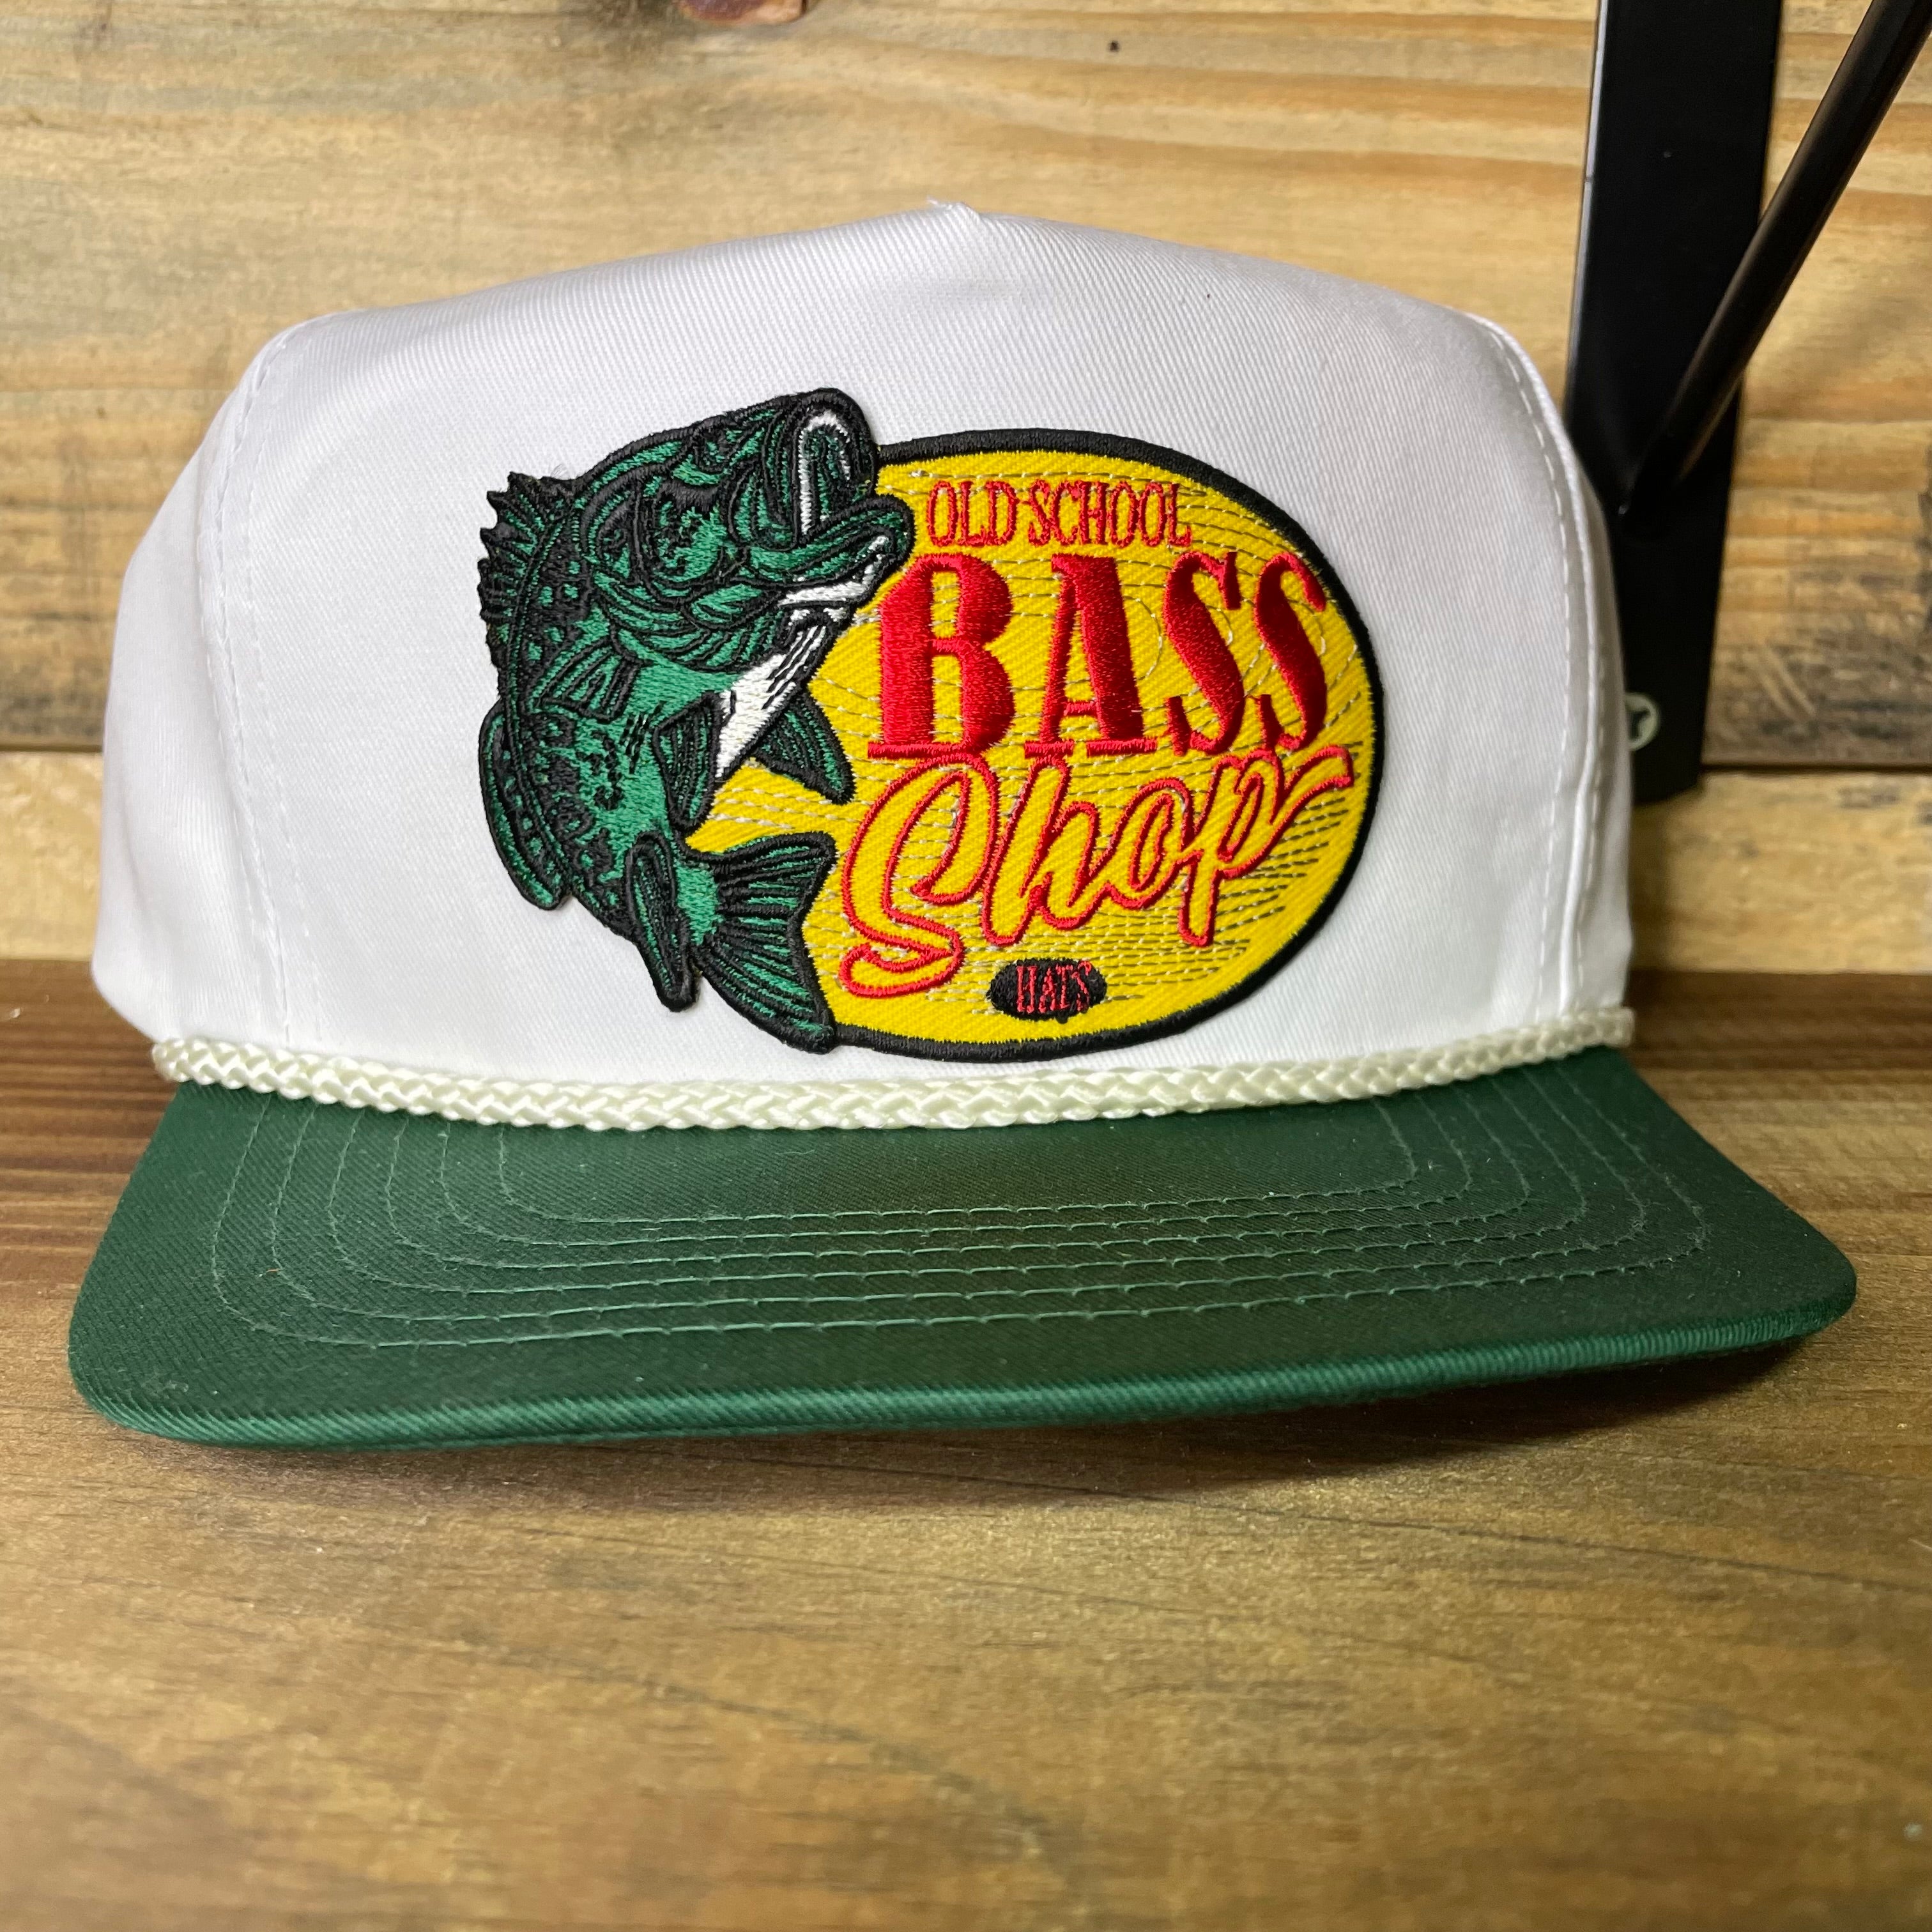 Old School Bass Fishing Shop Vintage Rope Green Brim White Mid